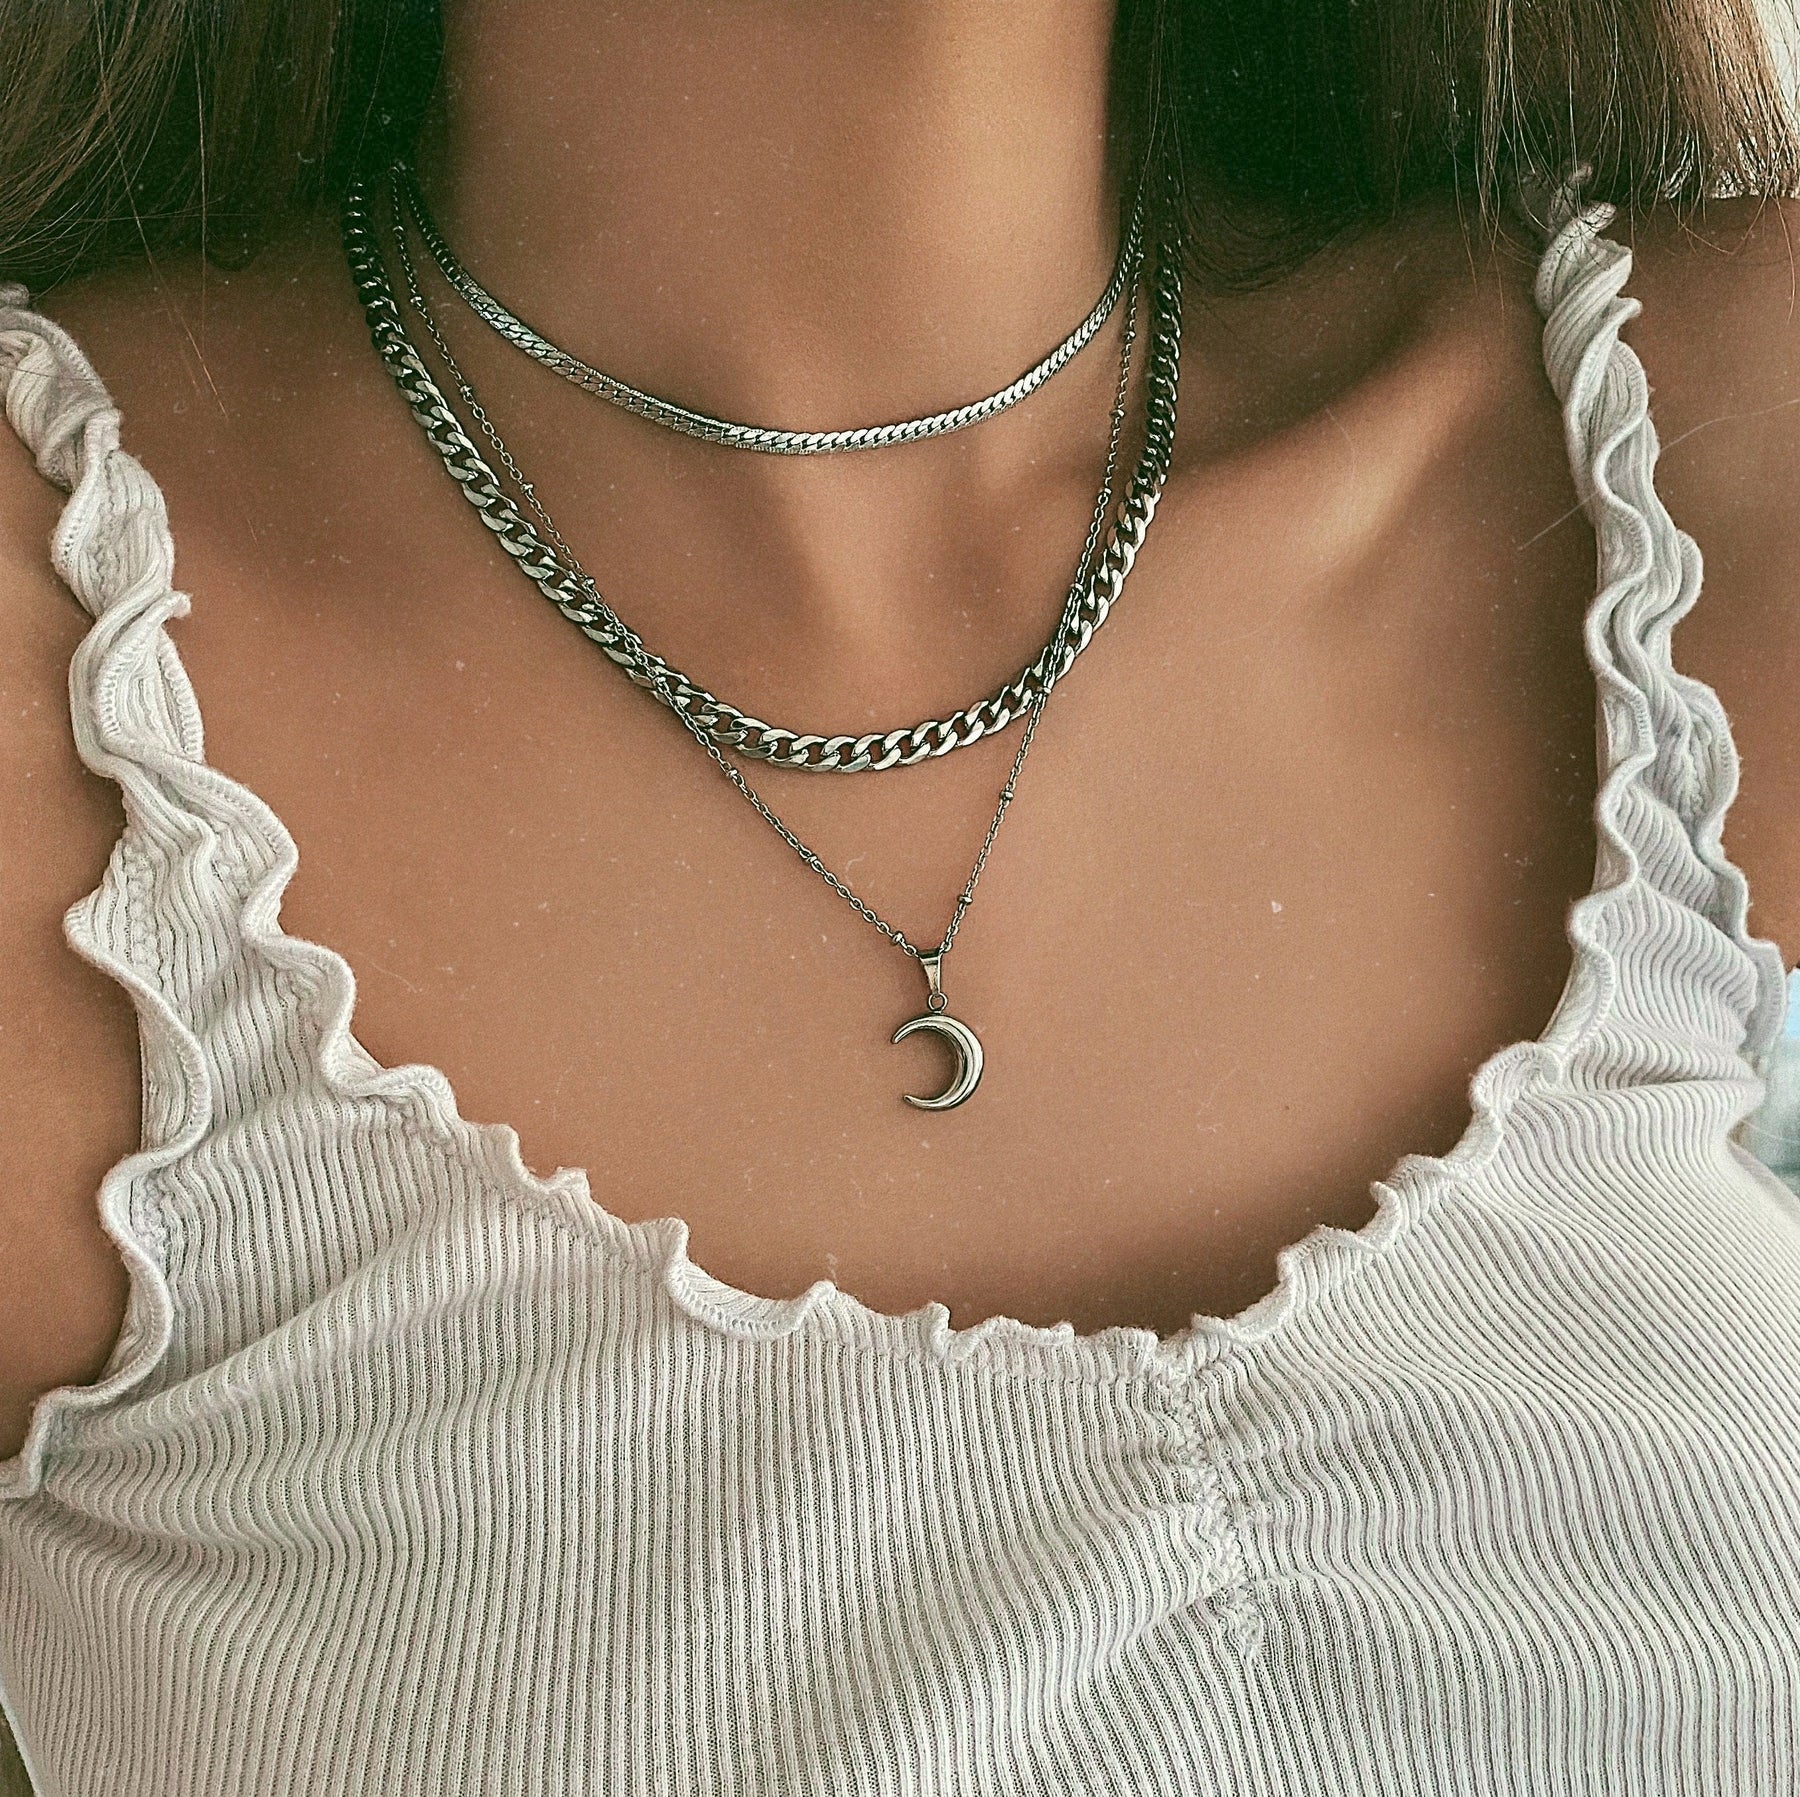 BohoMoon Stainless Steel Amalfi Chain Necklace